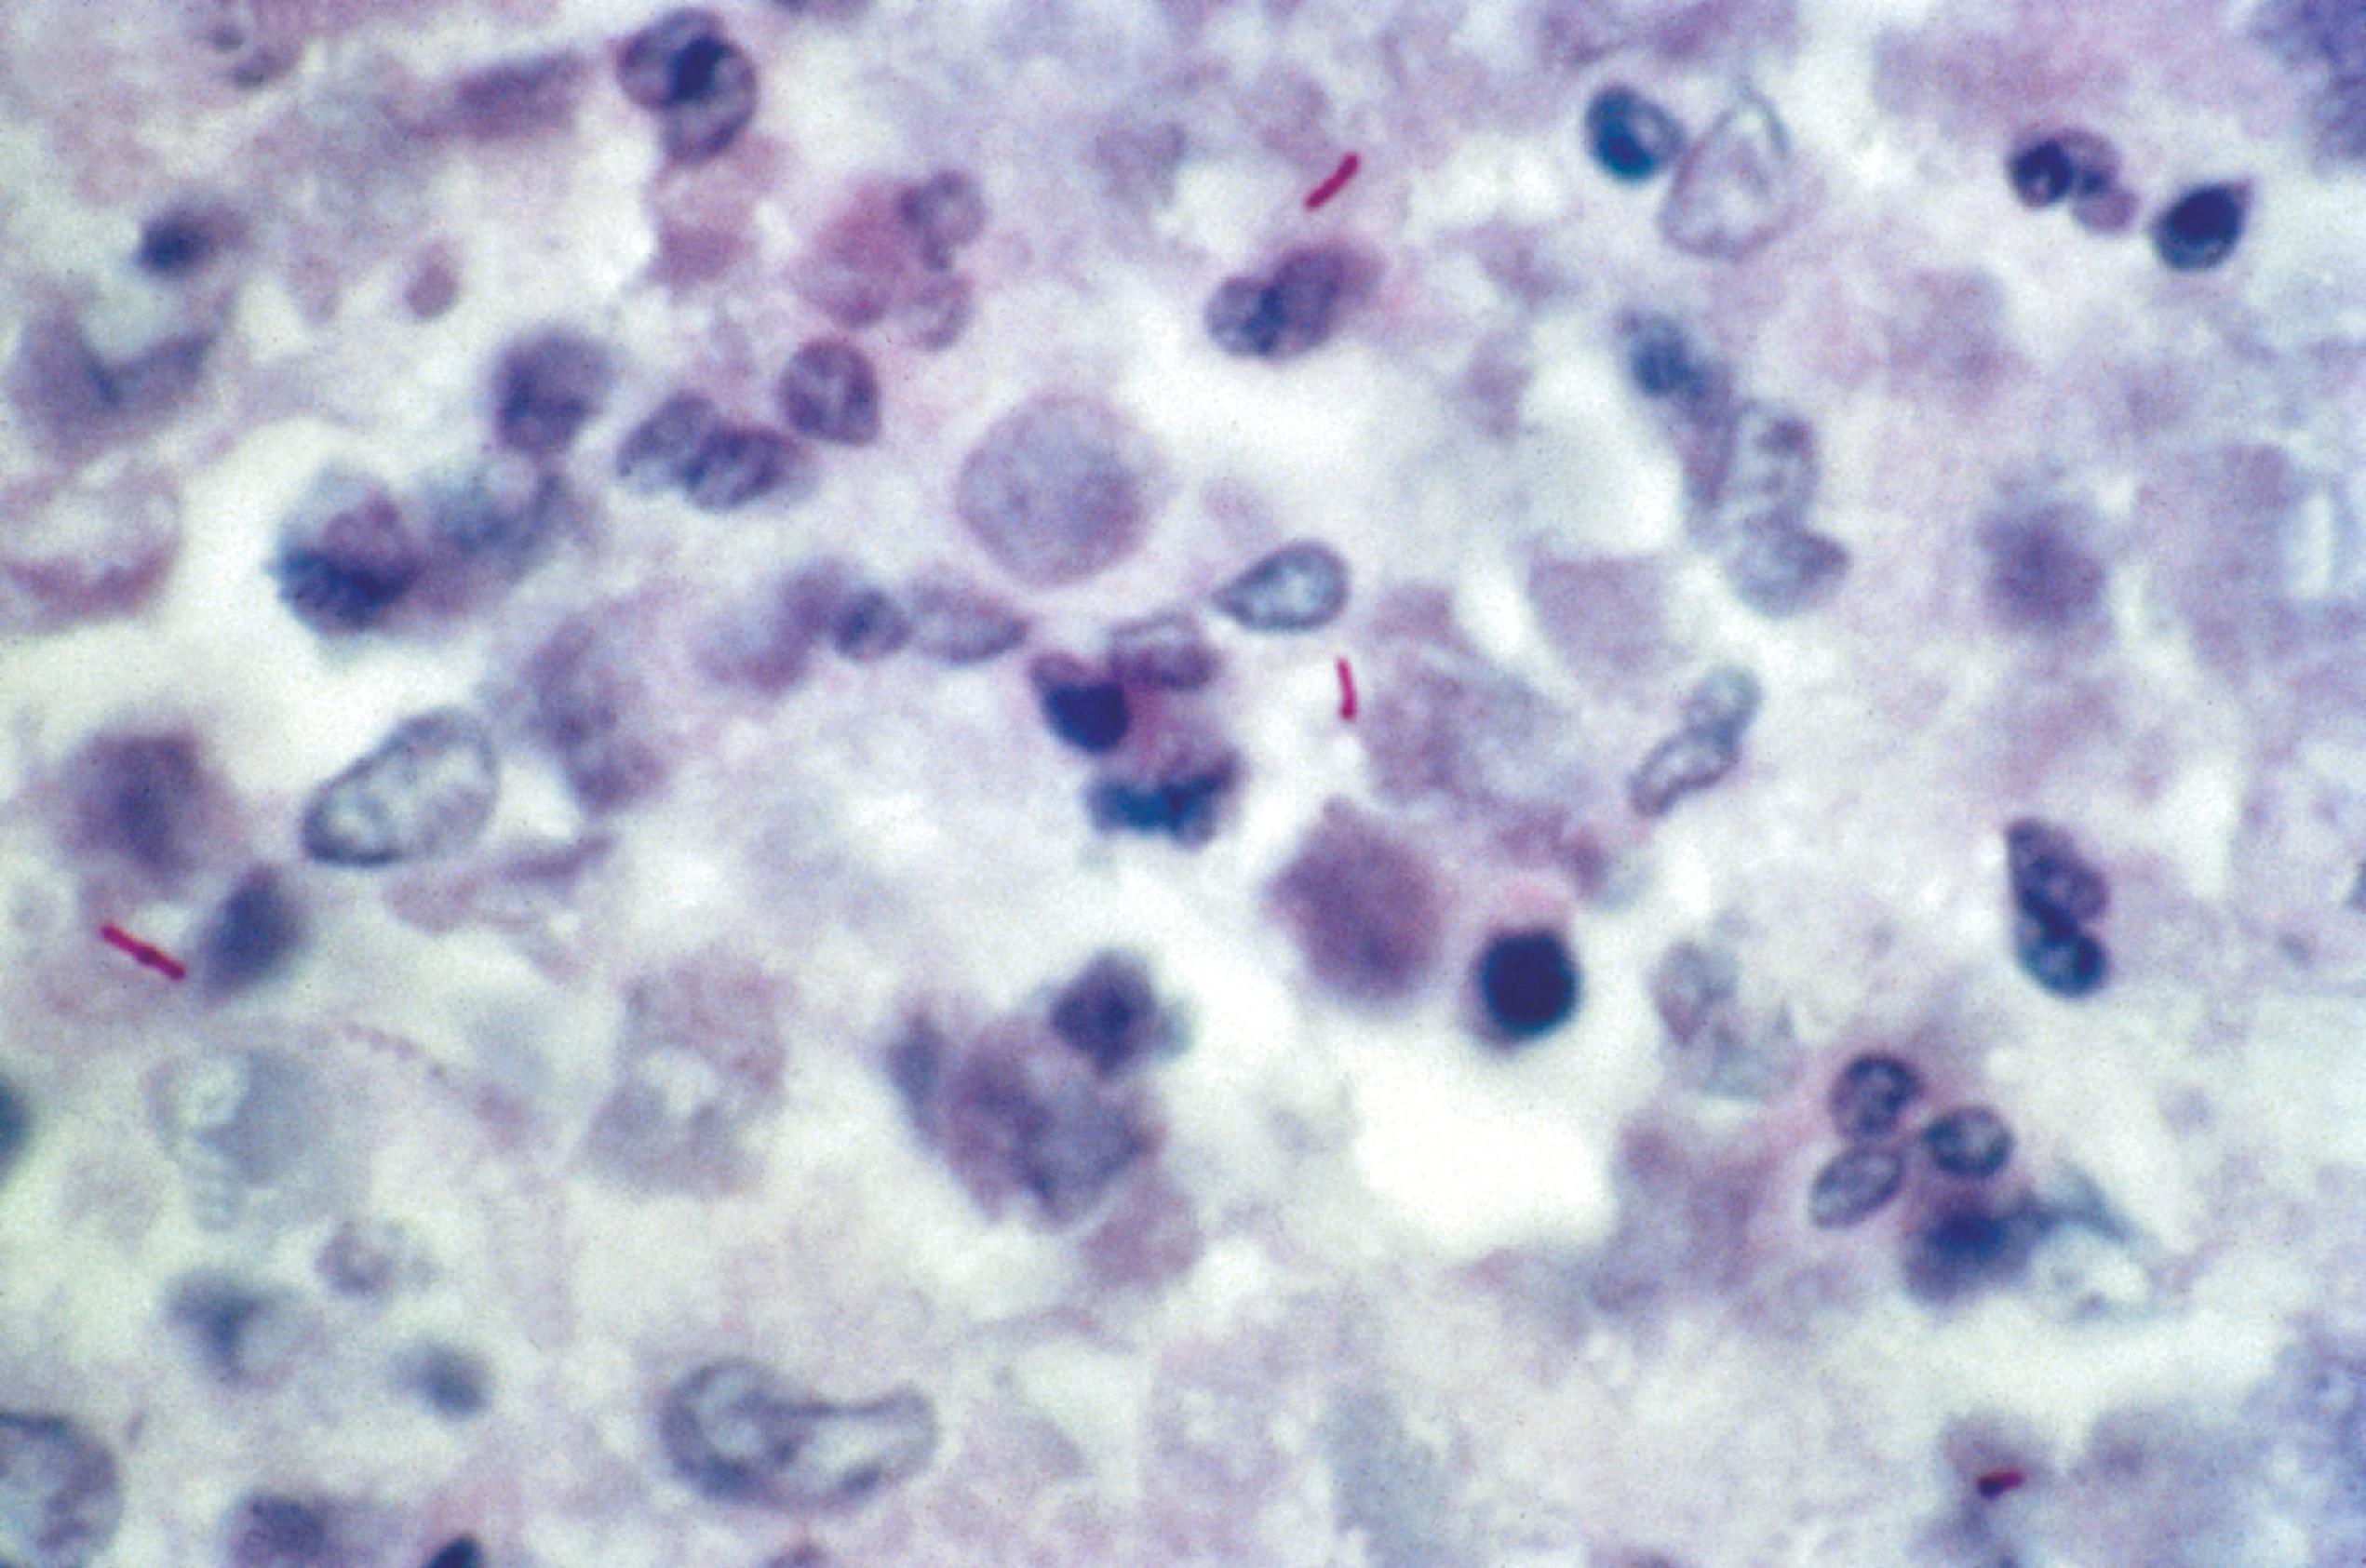 FIGURE 7.8, Tuberculosis. Acid-fast organisms, seen with a Ziehl-Neelsen stain, are often difficult to identify and should be searched for carefully in suspected cases of tuberculosis.